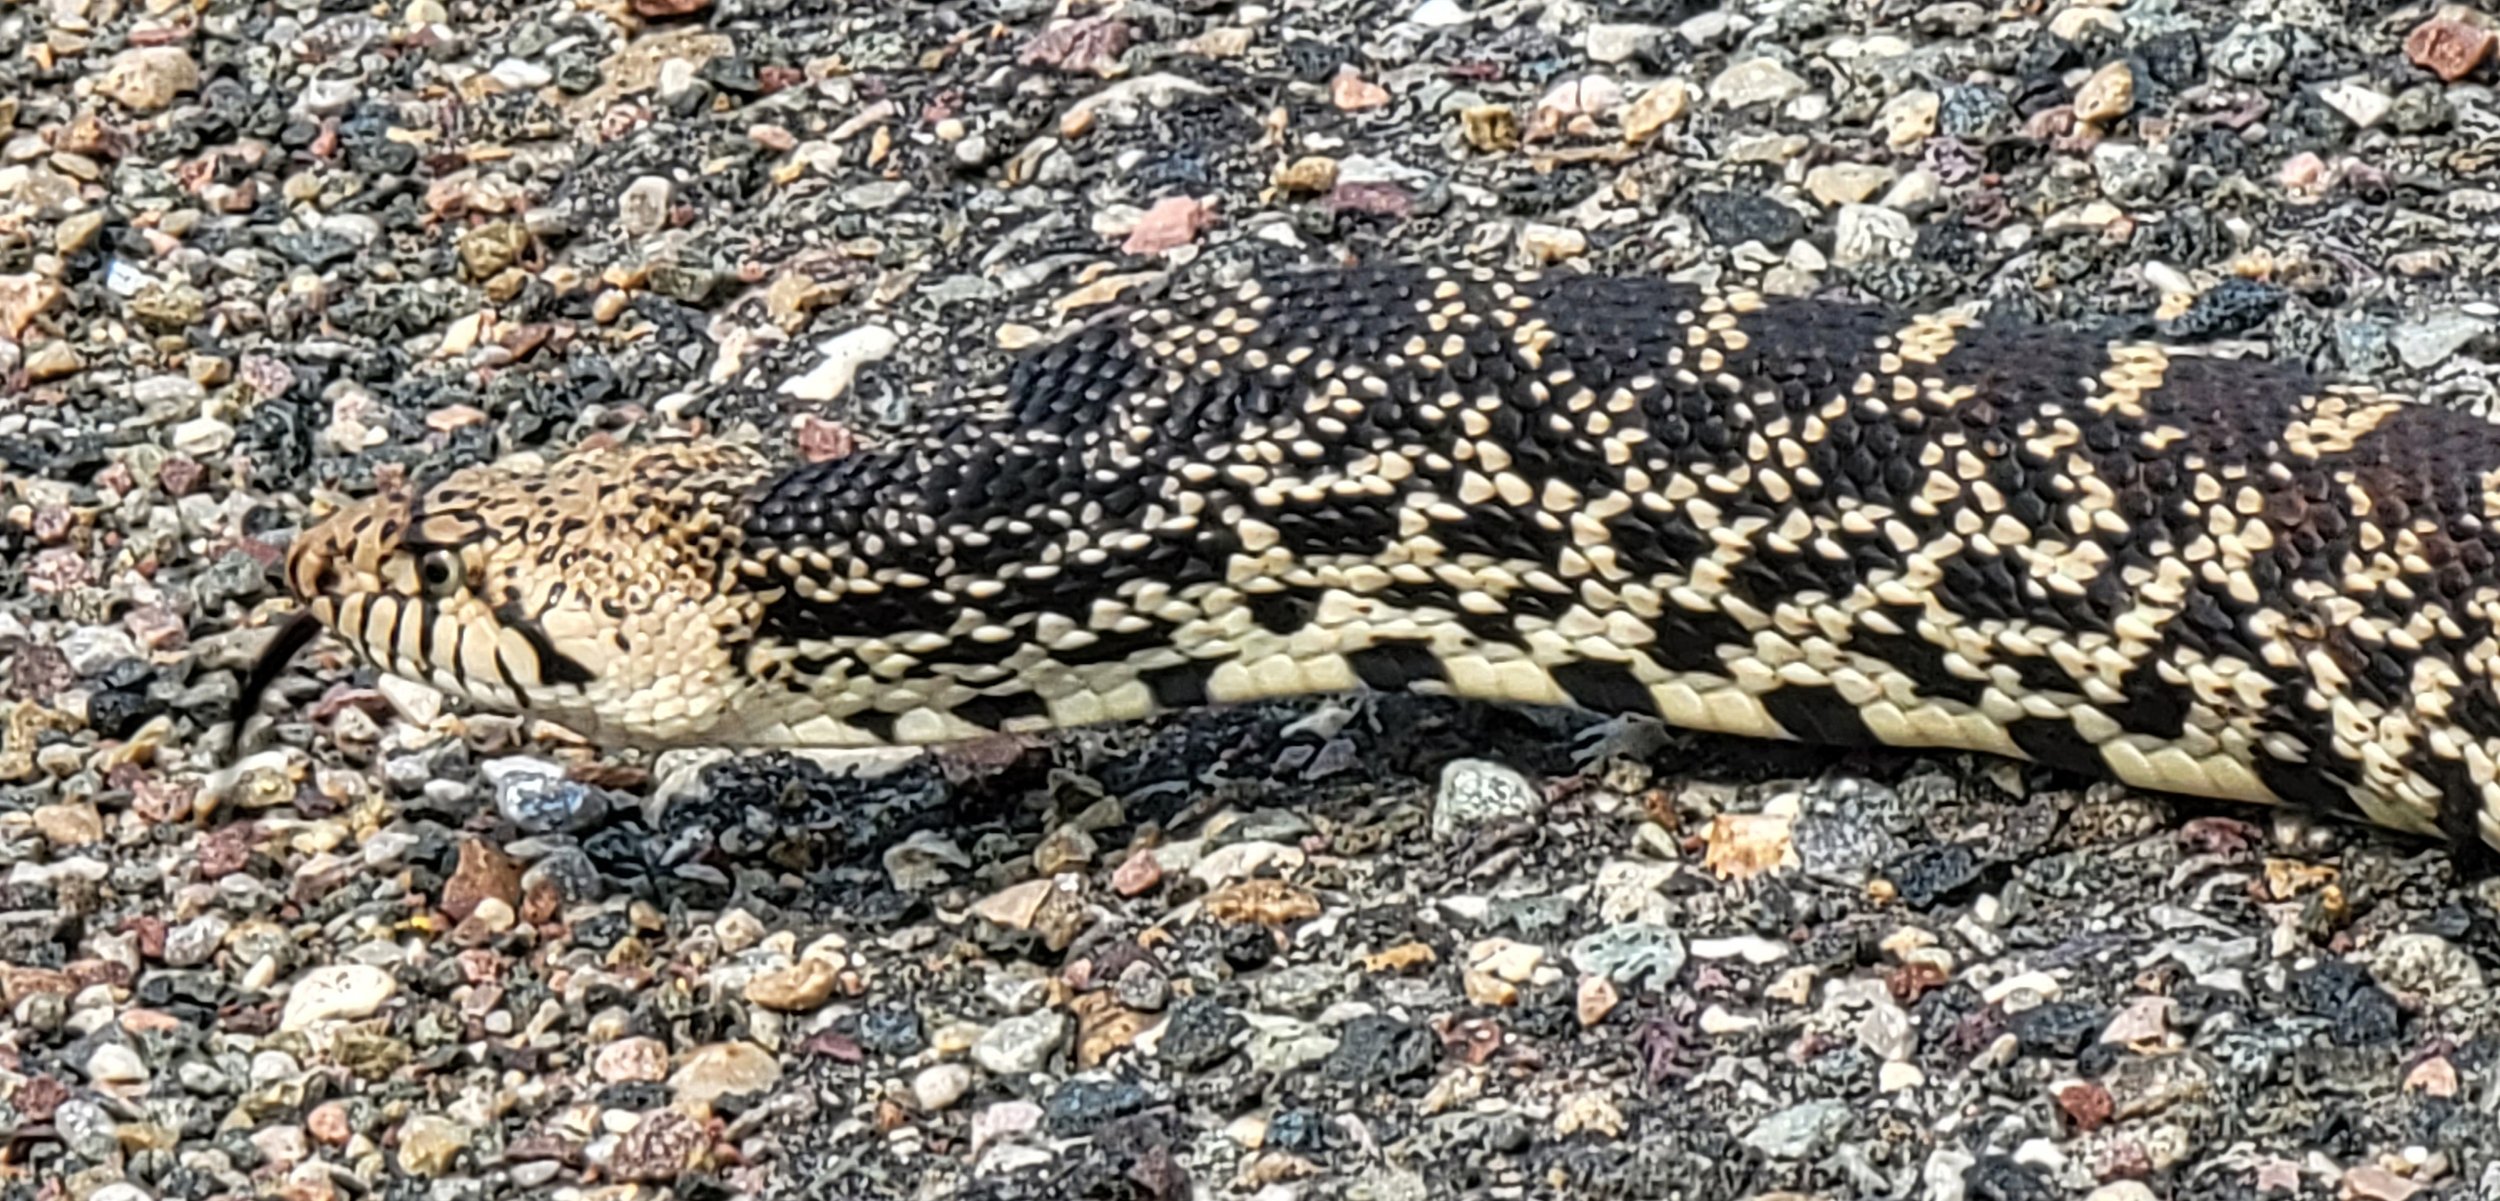 Look at him making a face at me. Yes I knew it wasn't a rattlesnake before offering my tender juicy foot to him.